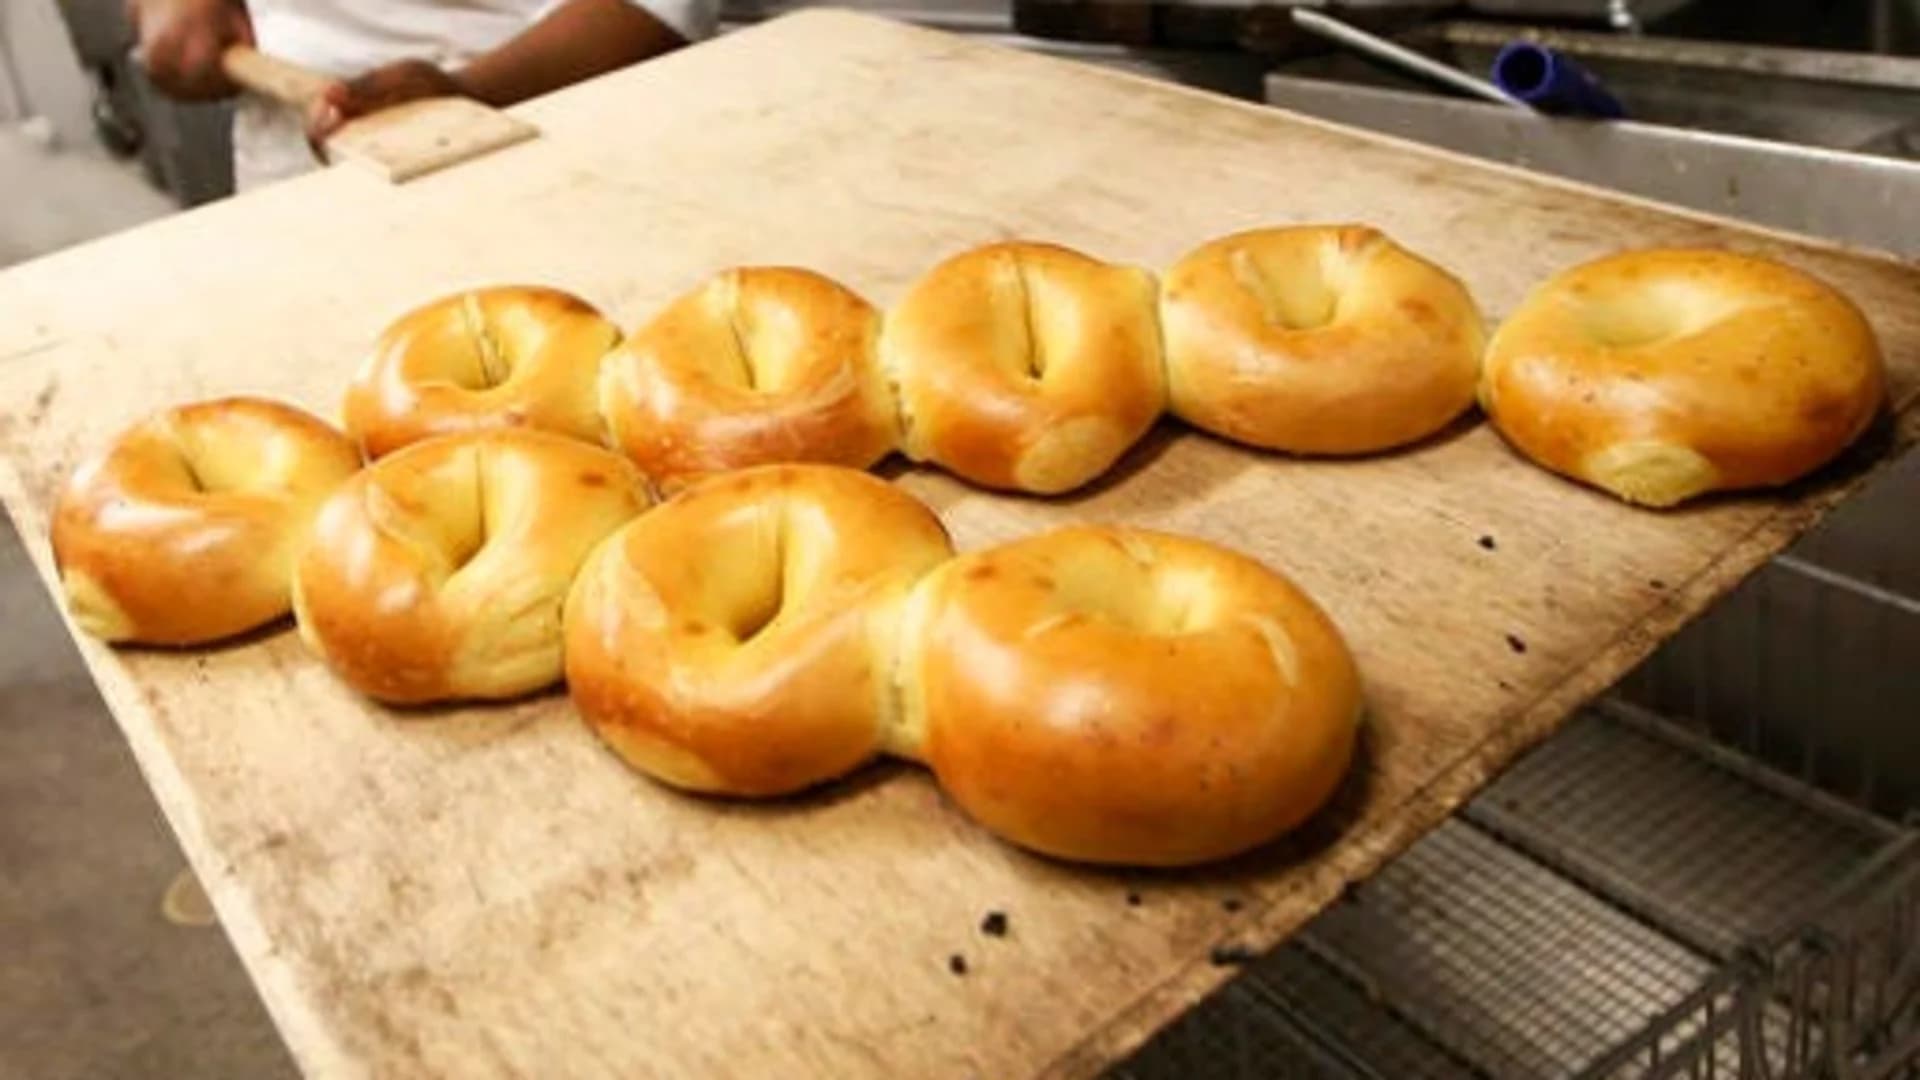 Mayor de Blasio draws ire of bagel aficionados with his order of choice -- whole-wheat, toasted